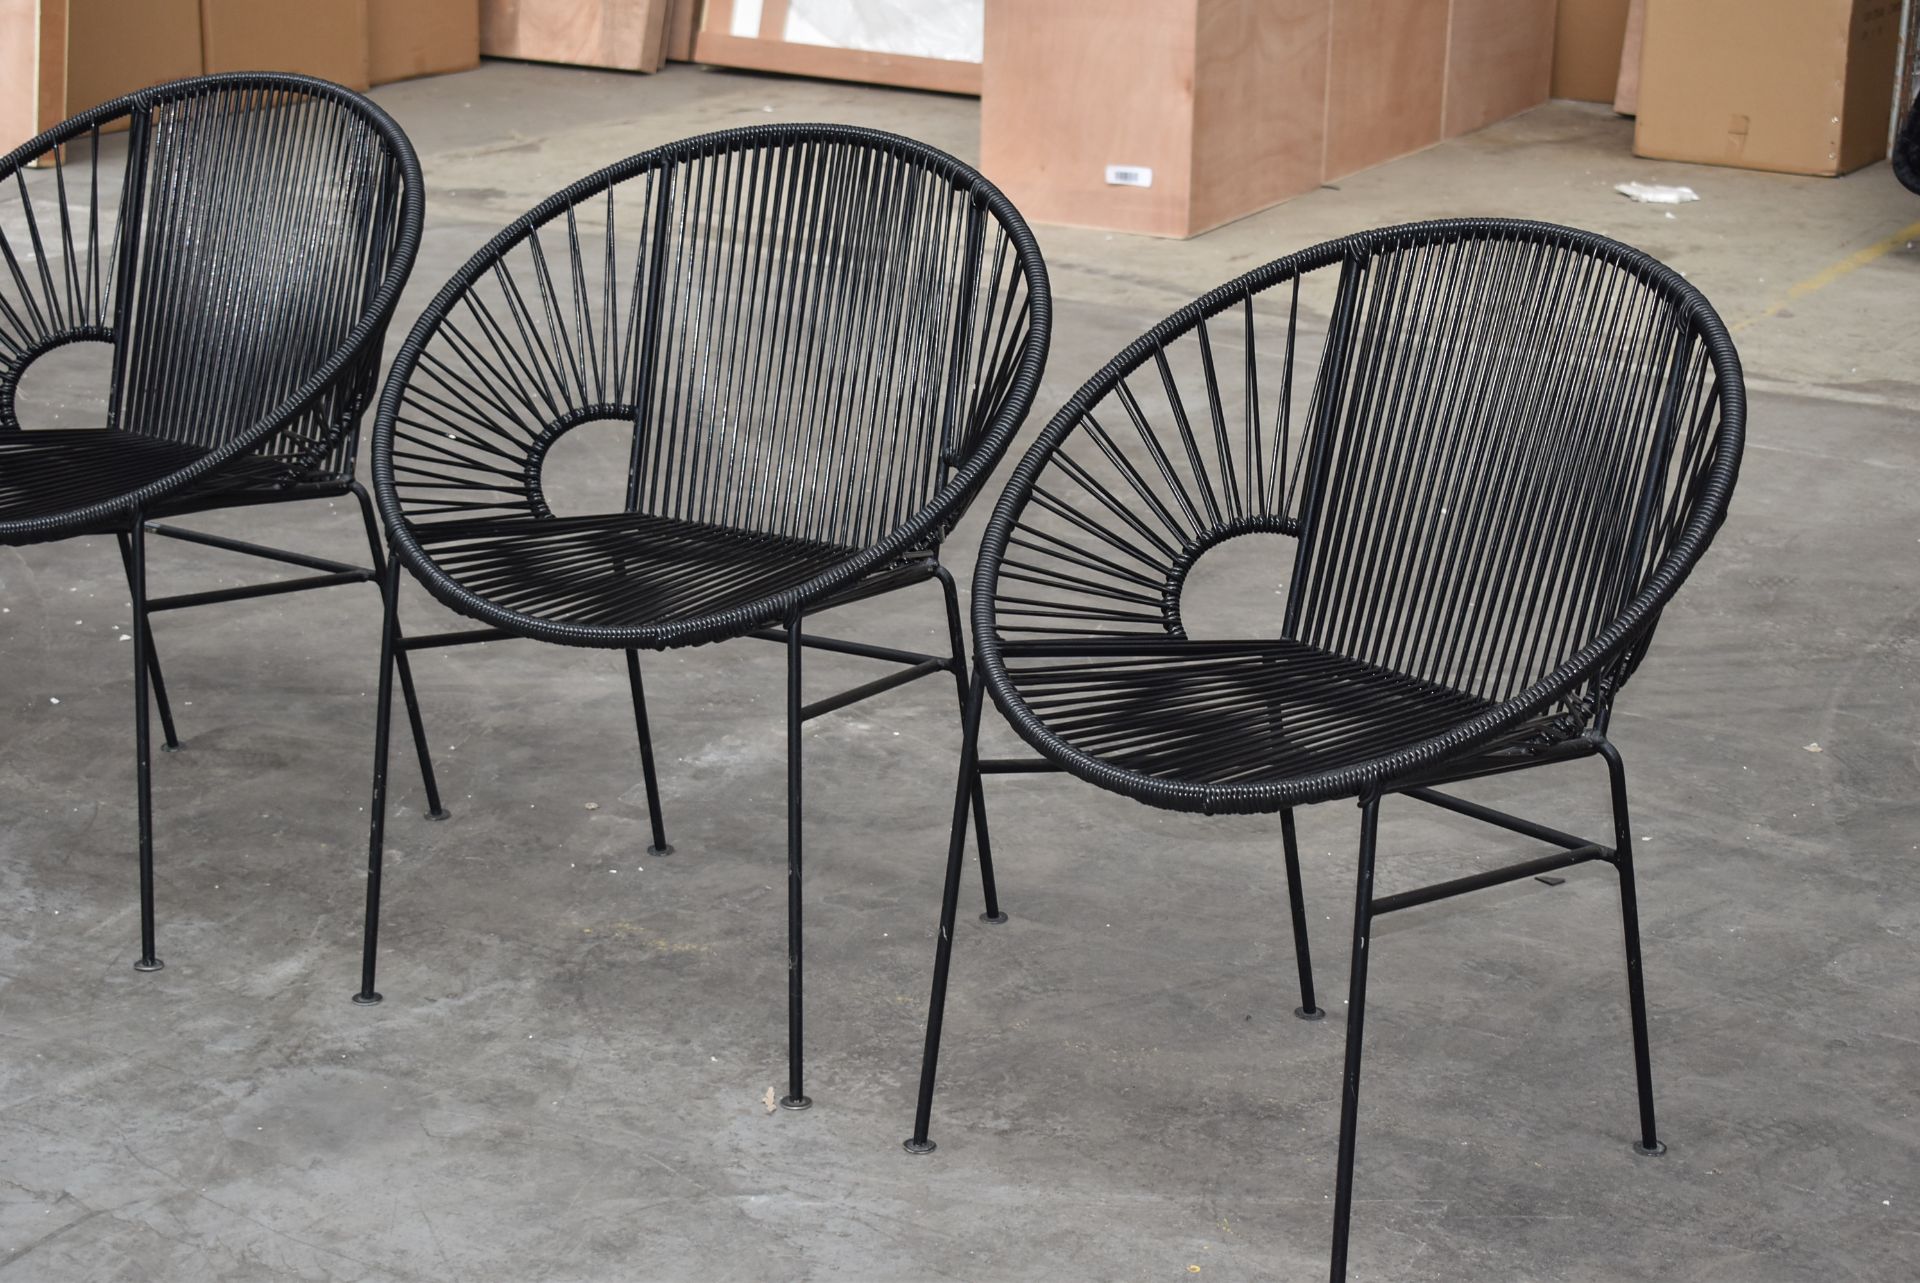 4 x Innit Designer Chairs - Acapulco Style Chairs in Black Suitable For Indoor or Outdoor Use - - Image 4 of 11